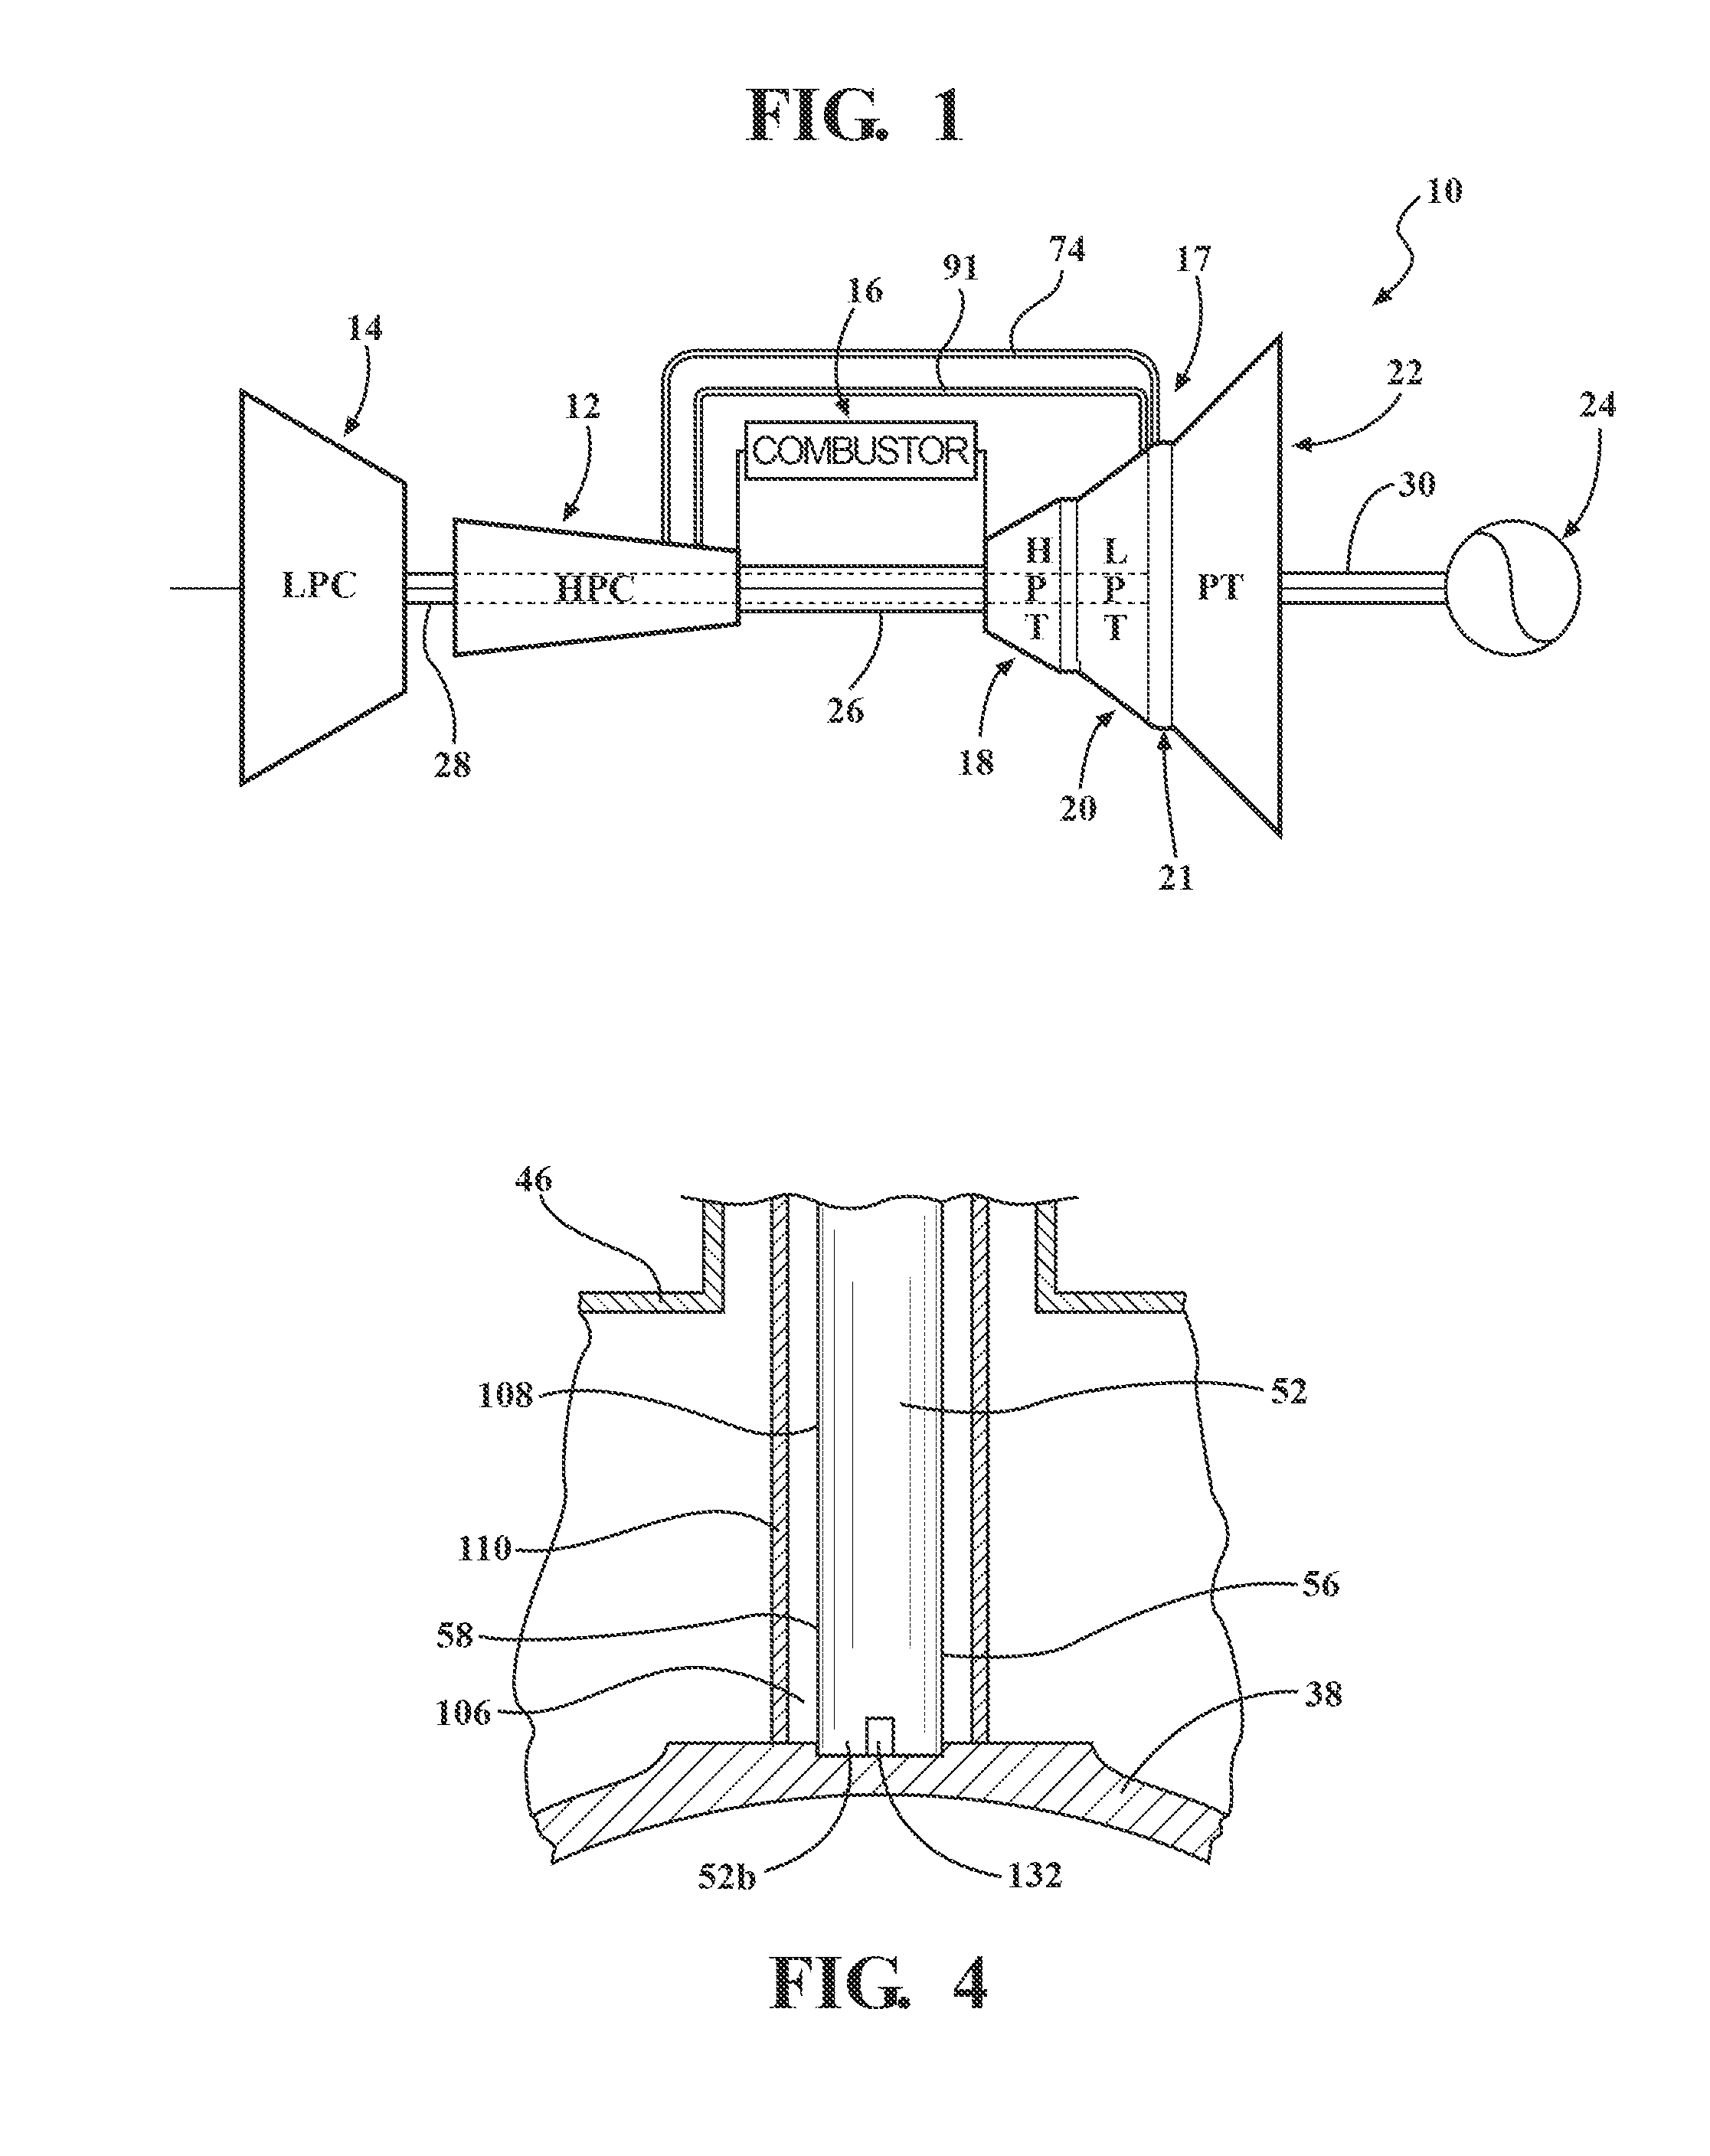 Purge and cooling air for an exhaust section of a gas turbine assembly